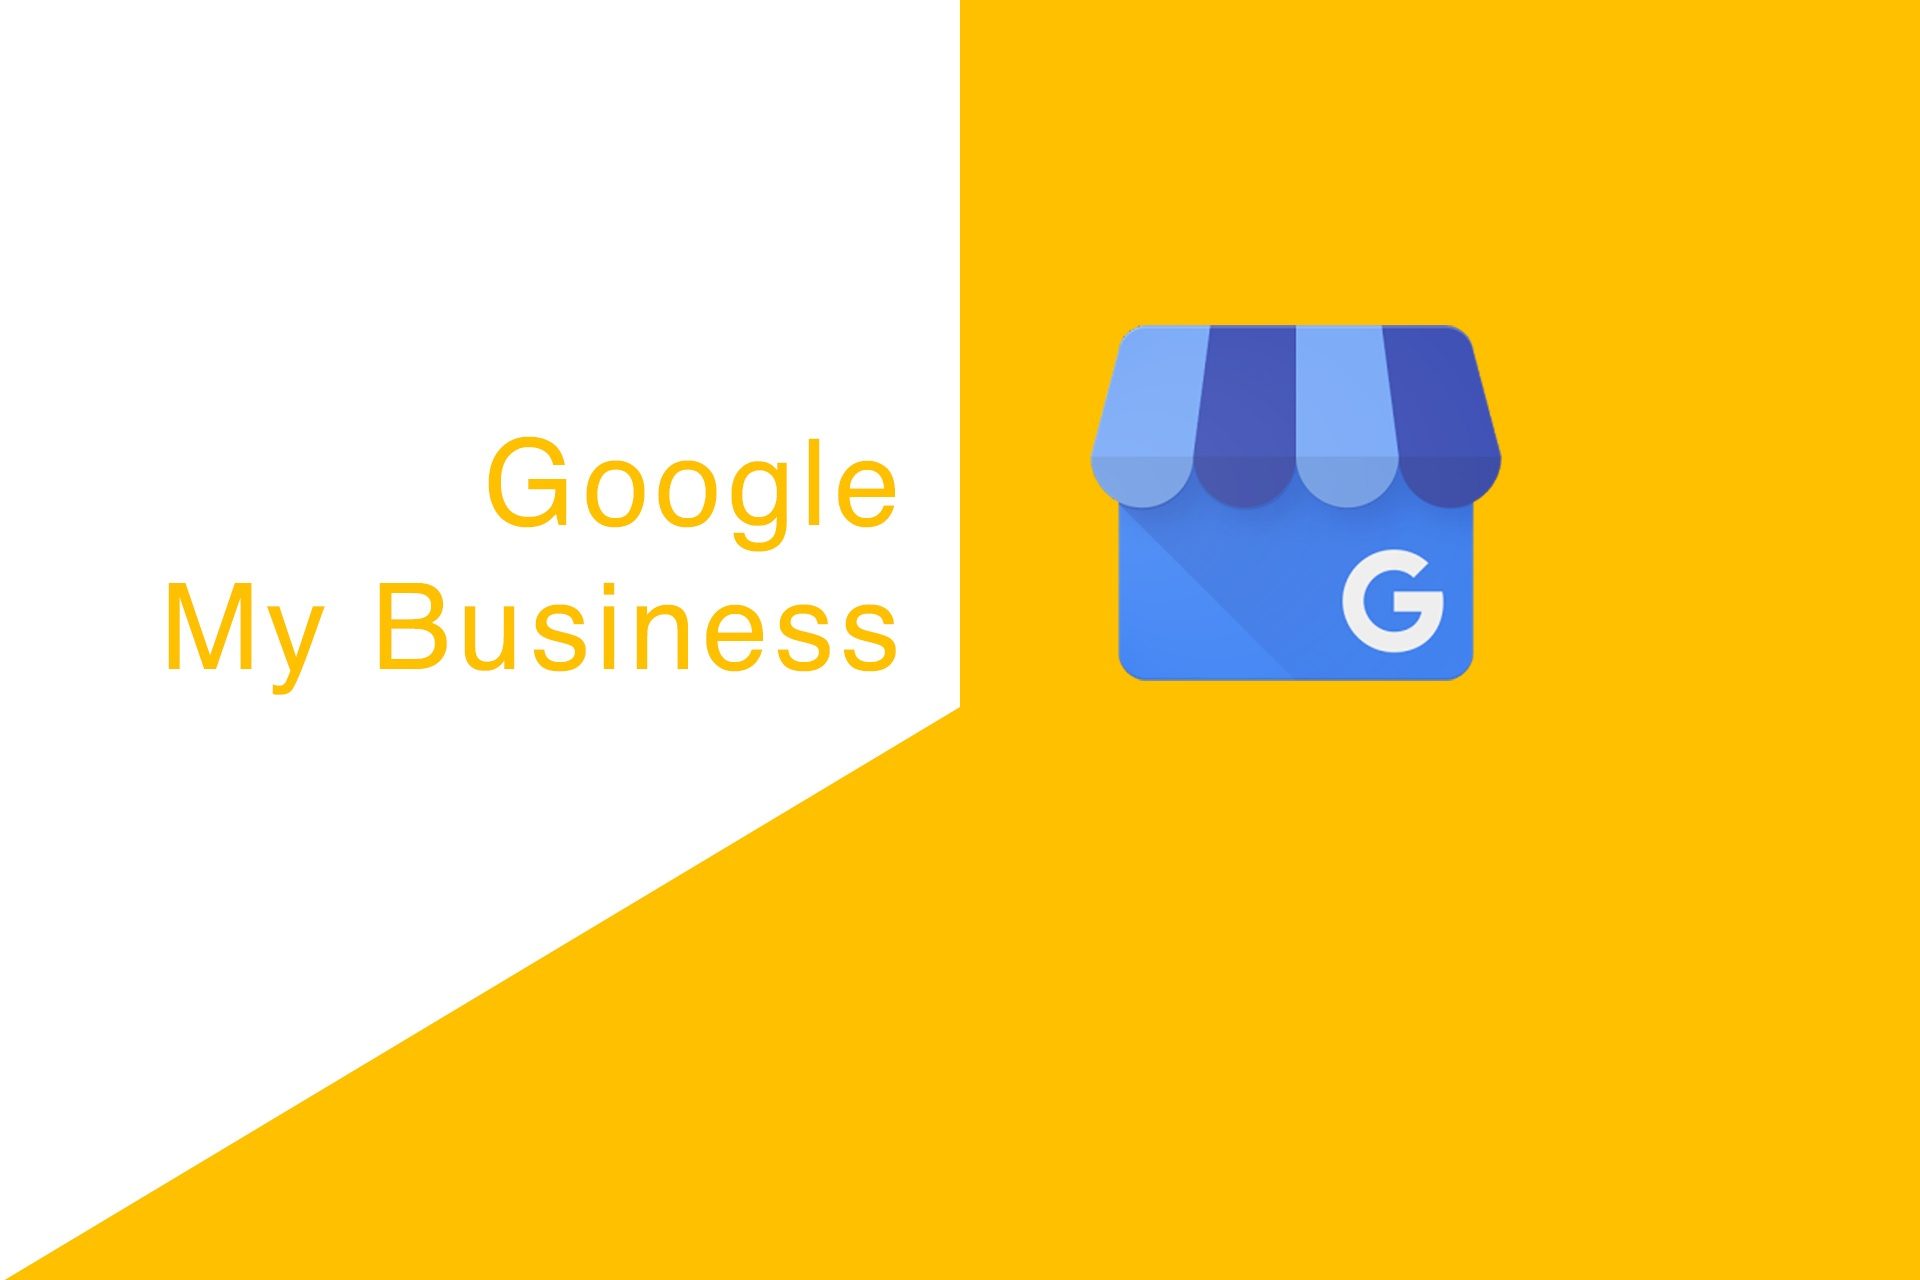 google-my-business-featured-image-1920x1280-isynergy